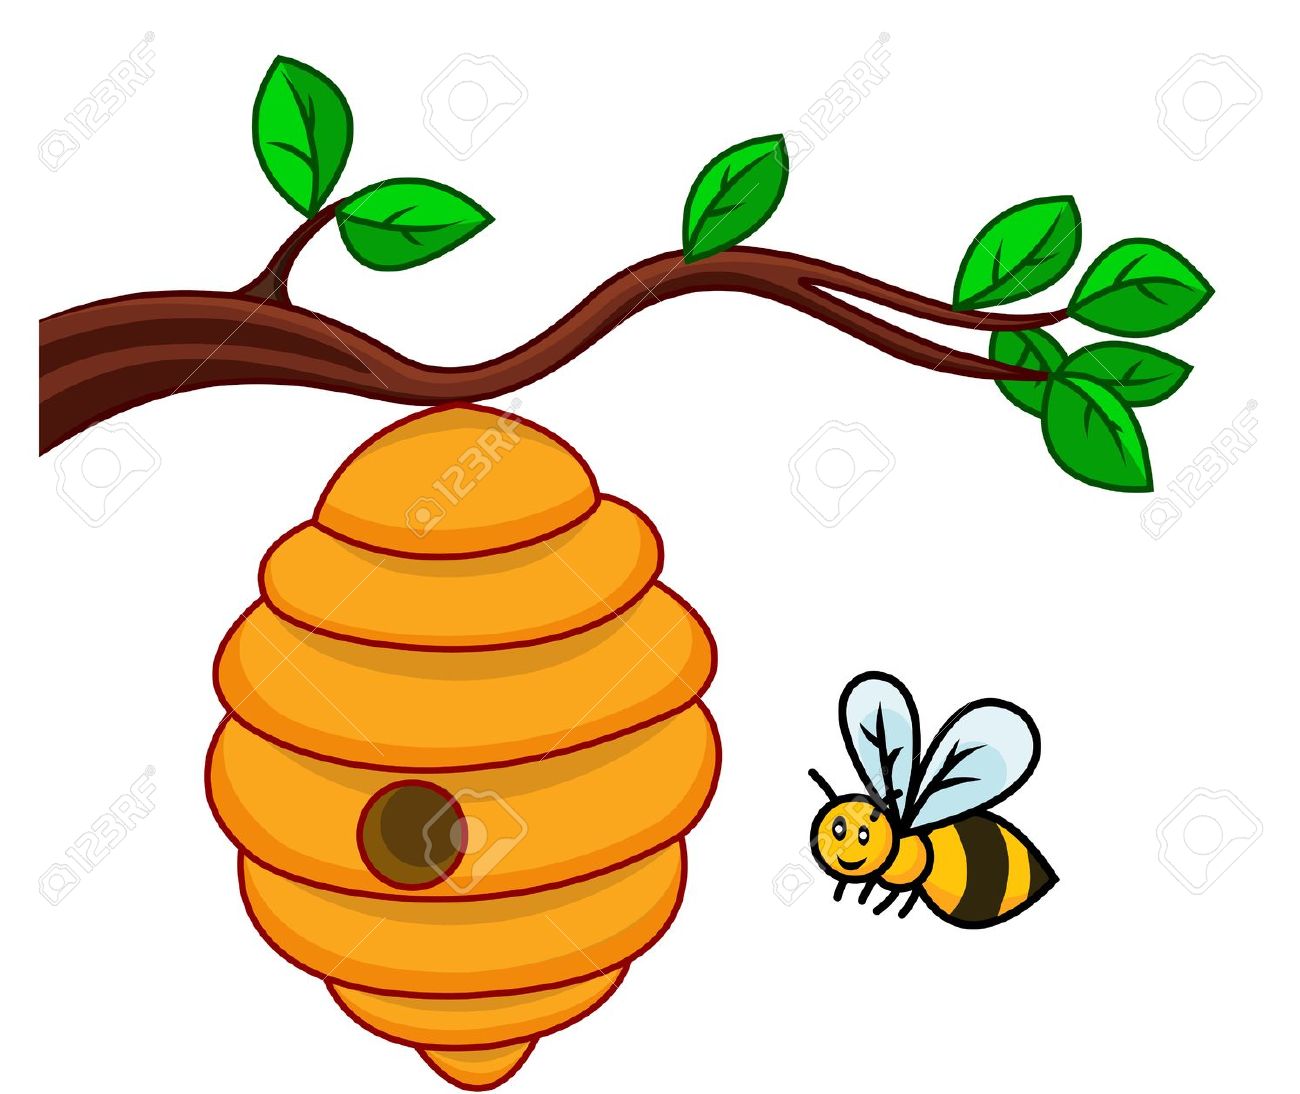 Beehive cliparts